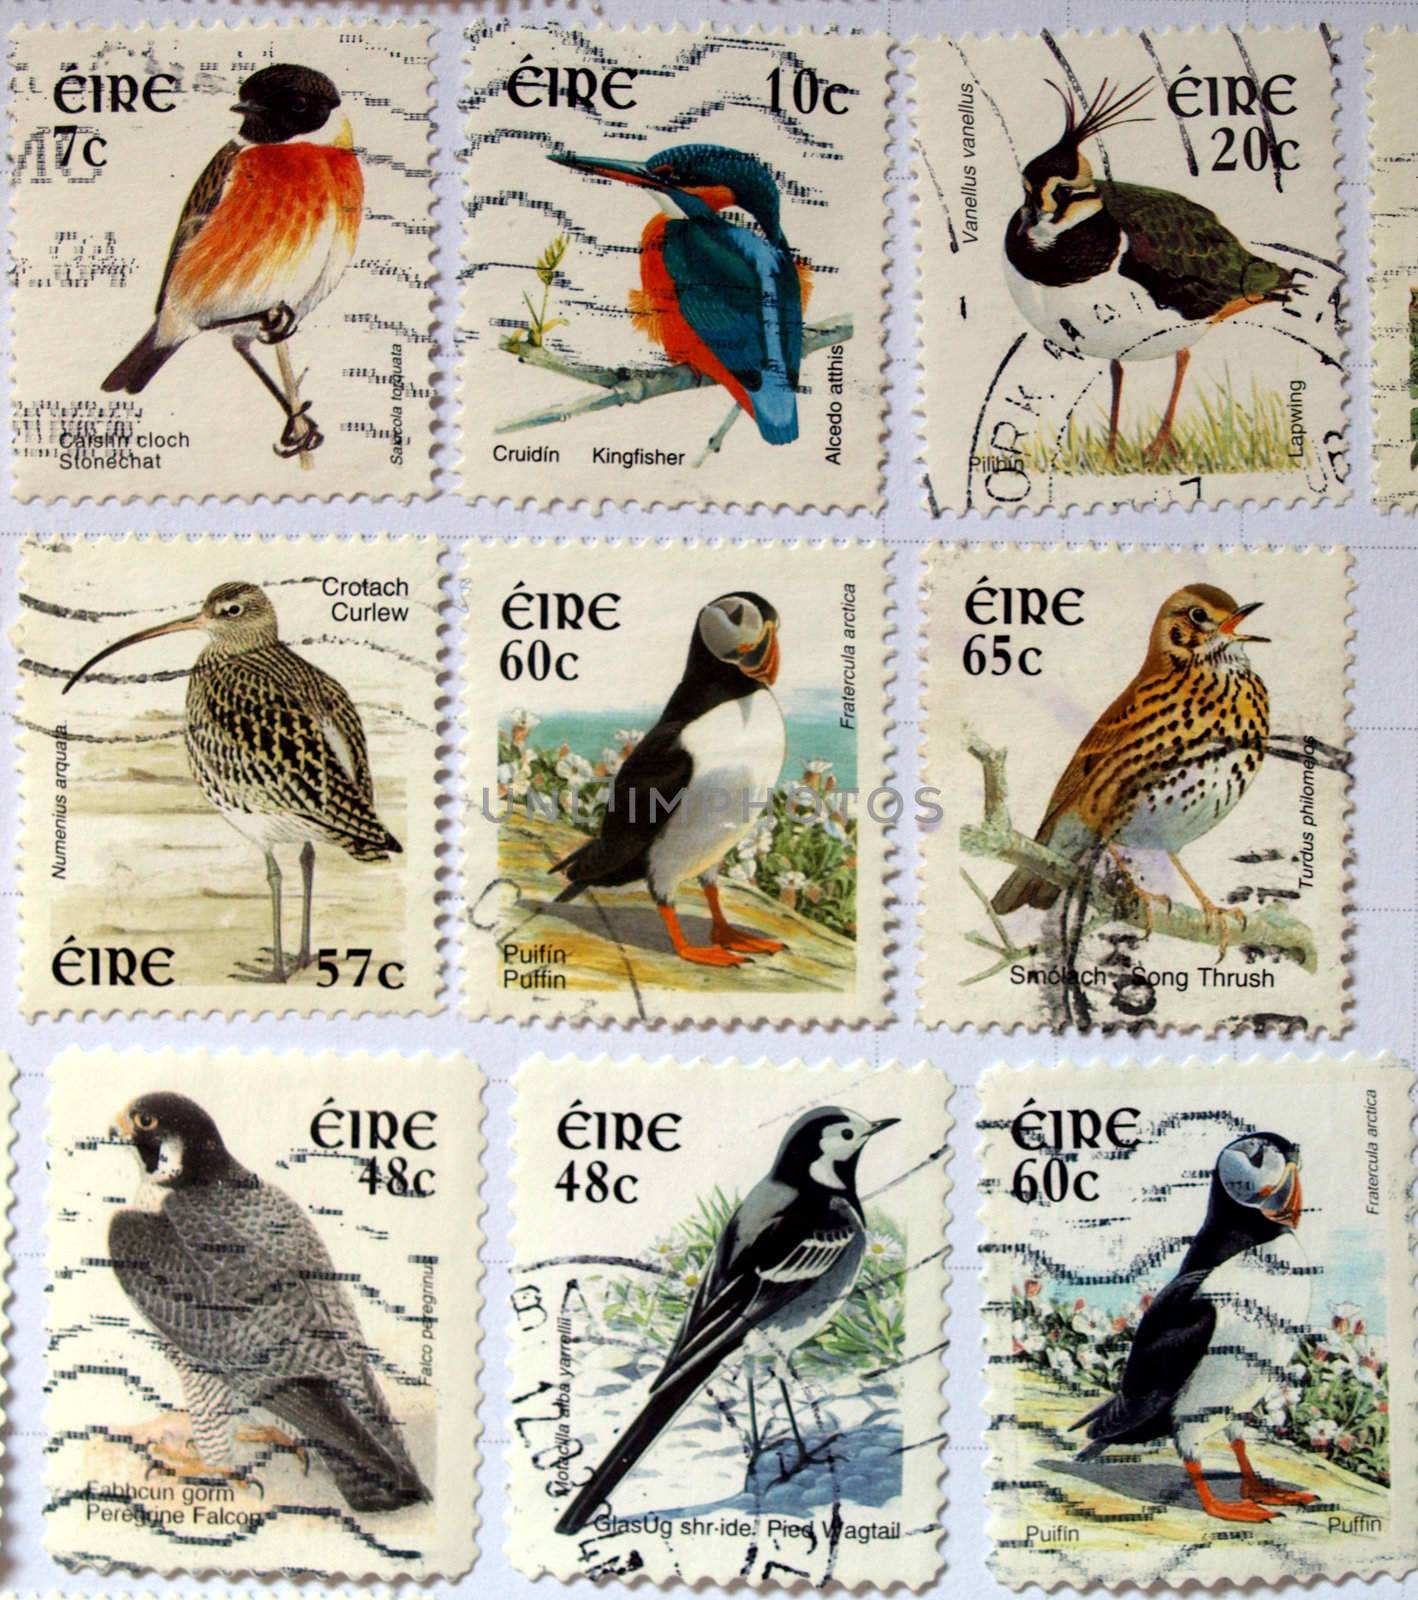 Irish stamps by paolo77